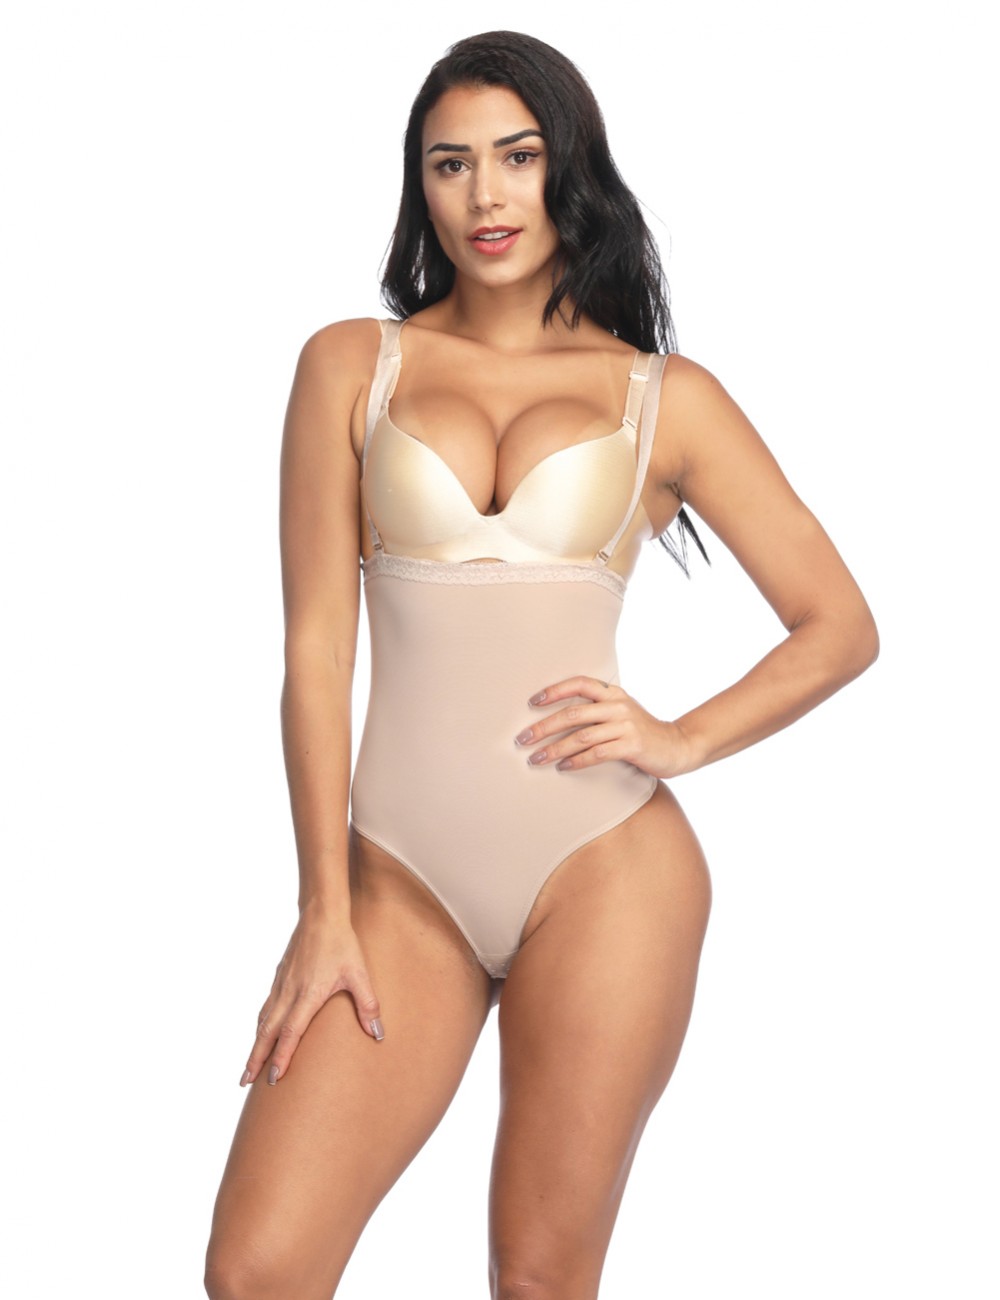 Nude Adjustable Straps Full Body Shapers Underbust Best Selling